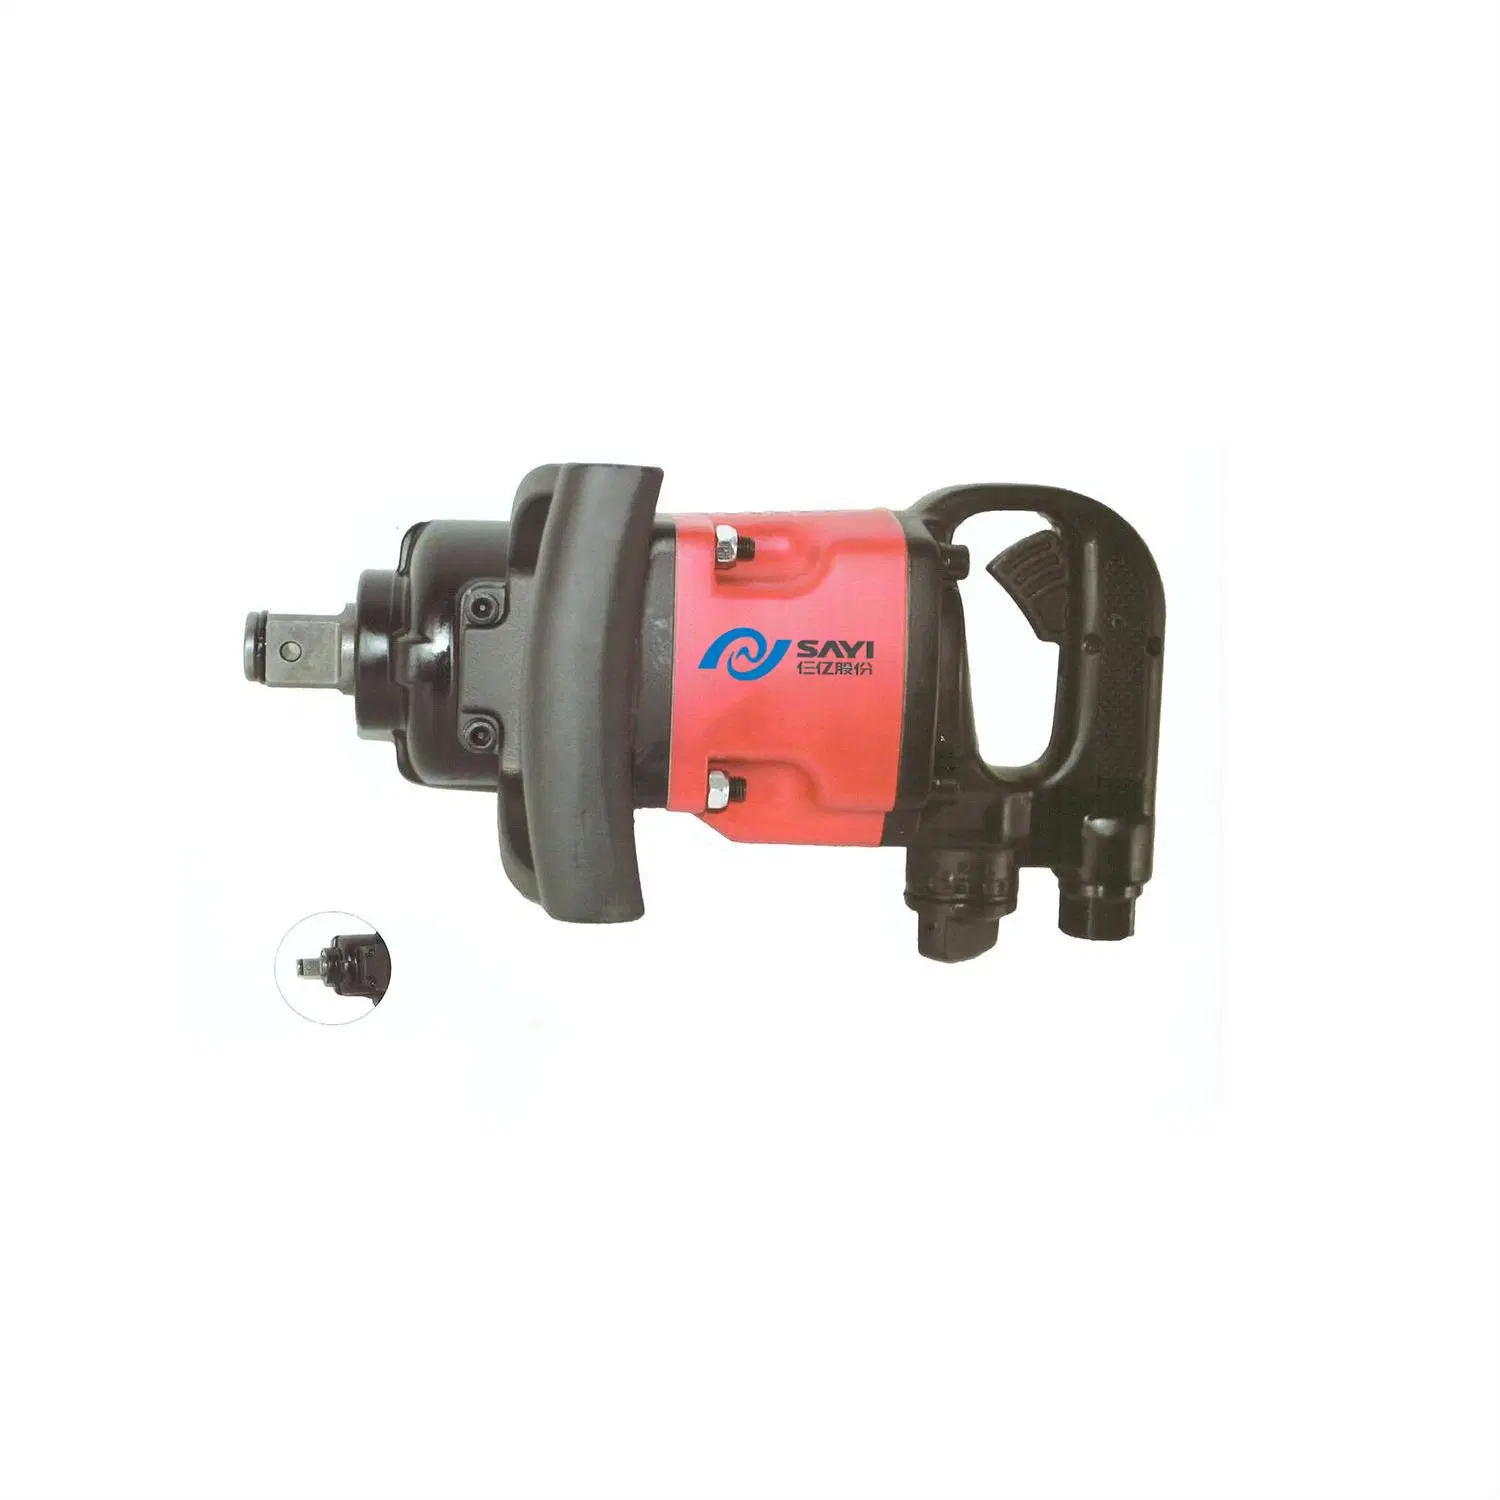 Air Tool Pneumatic Portable Power Handtool Hardware Air Impact Wrench Sy-12L Tools Power Auto motorcycle Industial Wrench